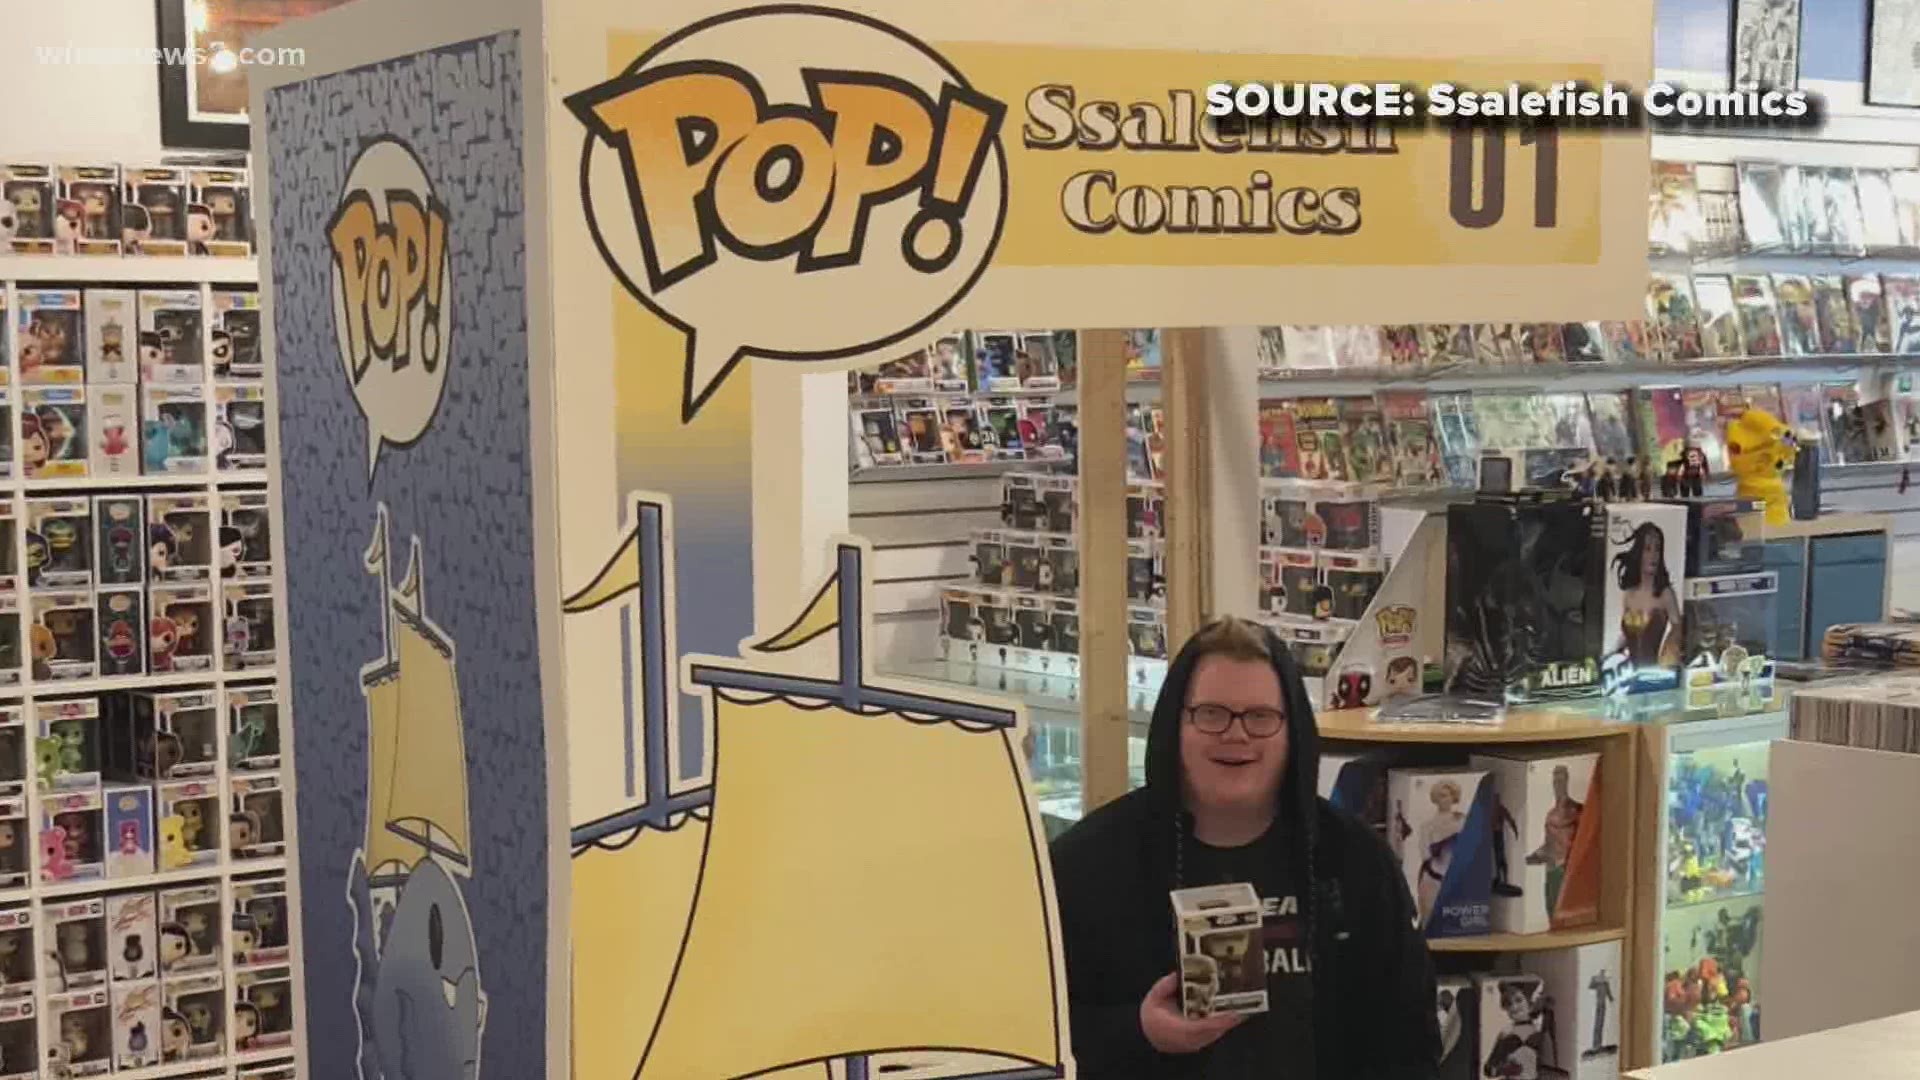 Local businesses join forces to host a socially distanced ComicCon in Lexington. Find out what makes it a unique event.